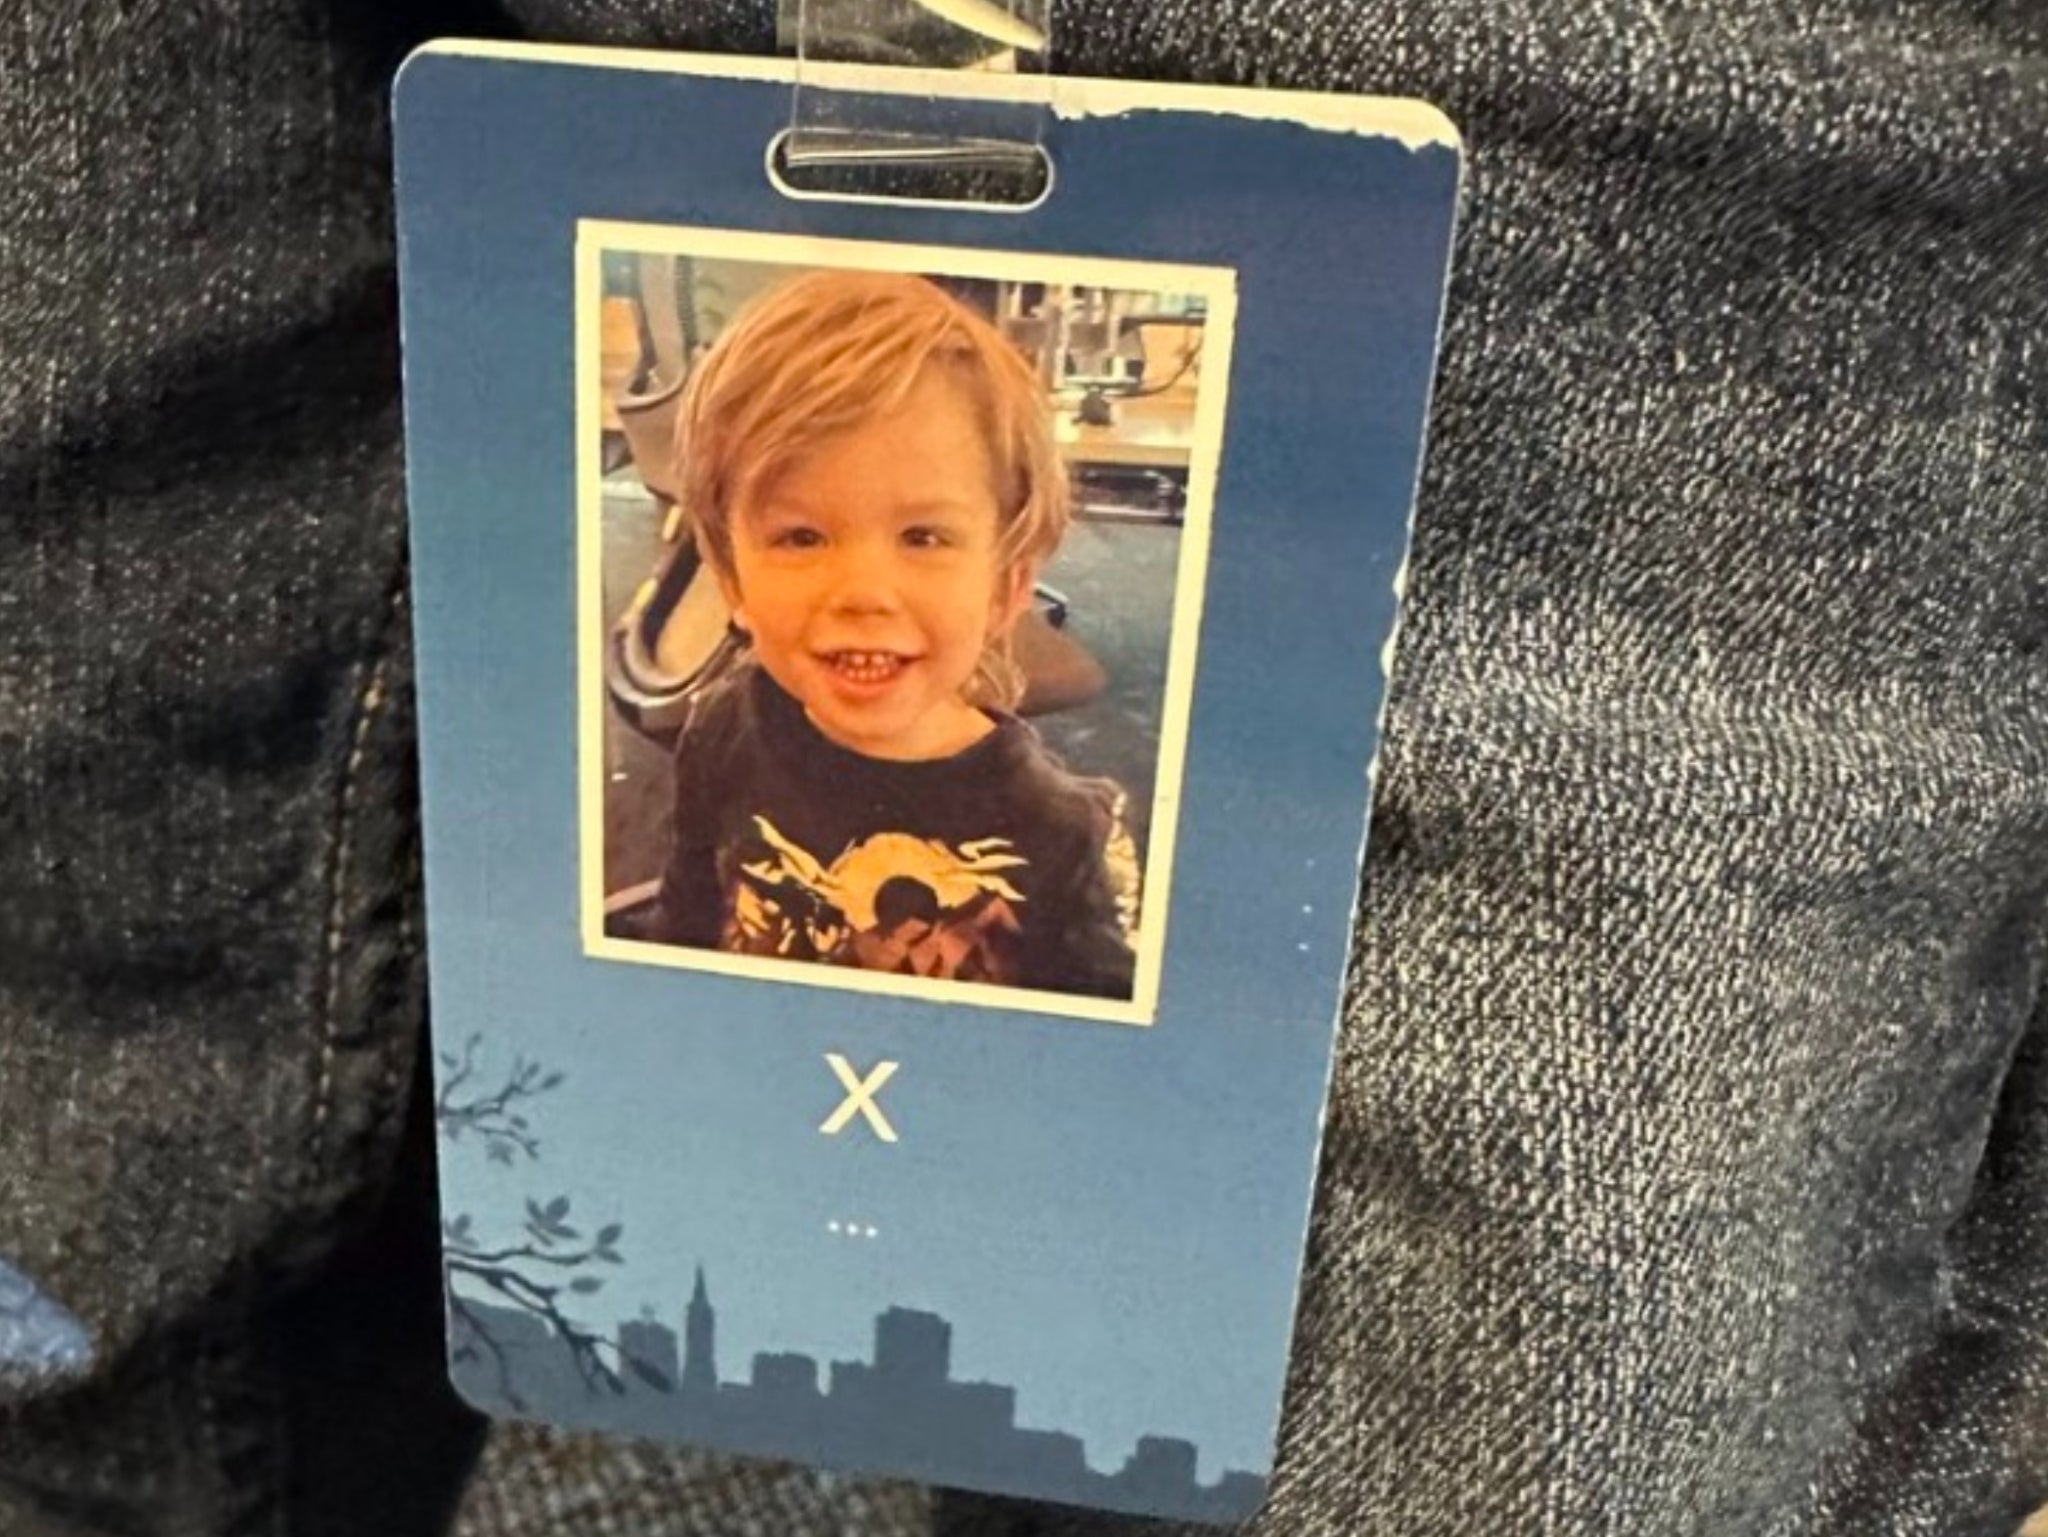 Elon Musk’s son X wore an employee badge on his visit to Twitter